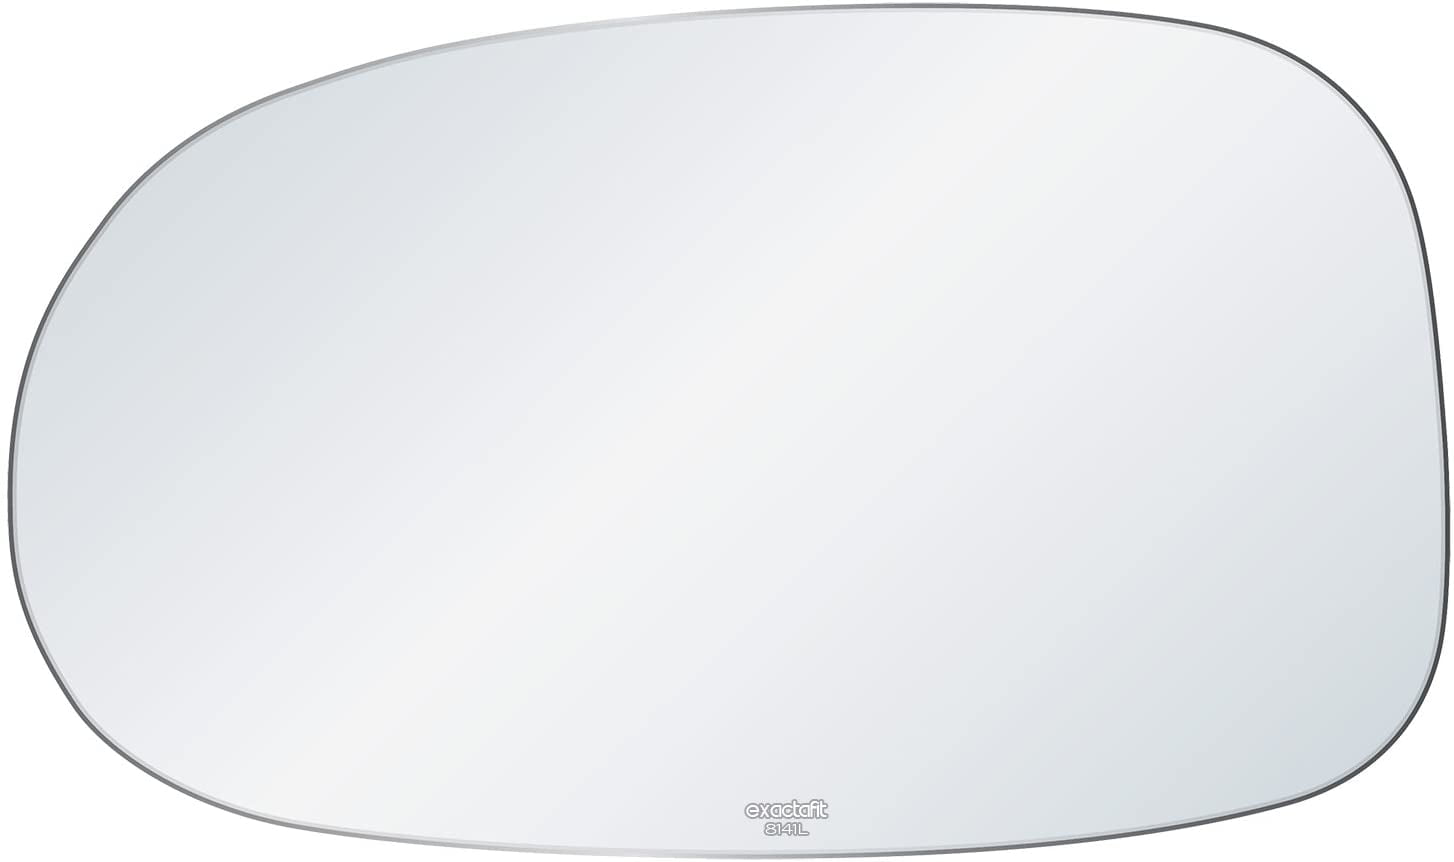 Fit System 90190 Nissan Maxima Passenger Side Replacement Mirror Glass